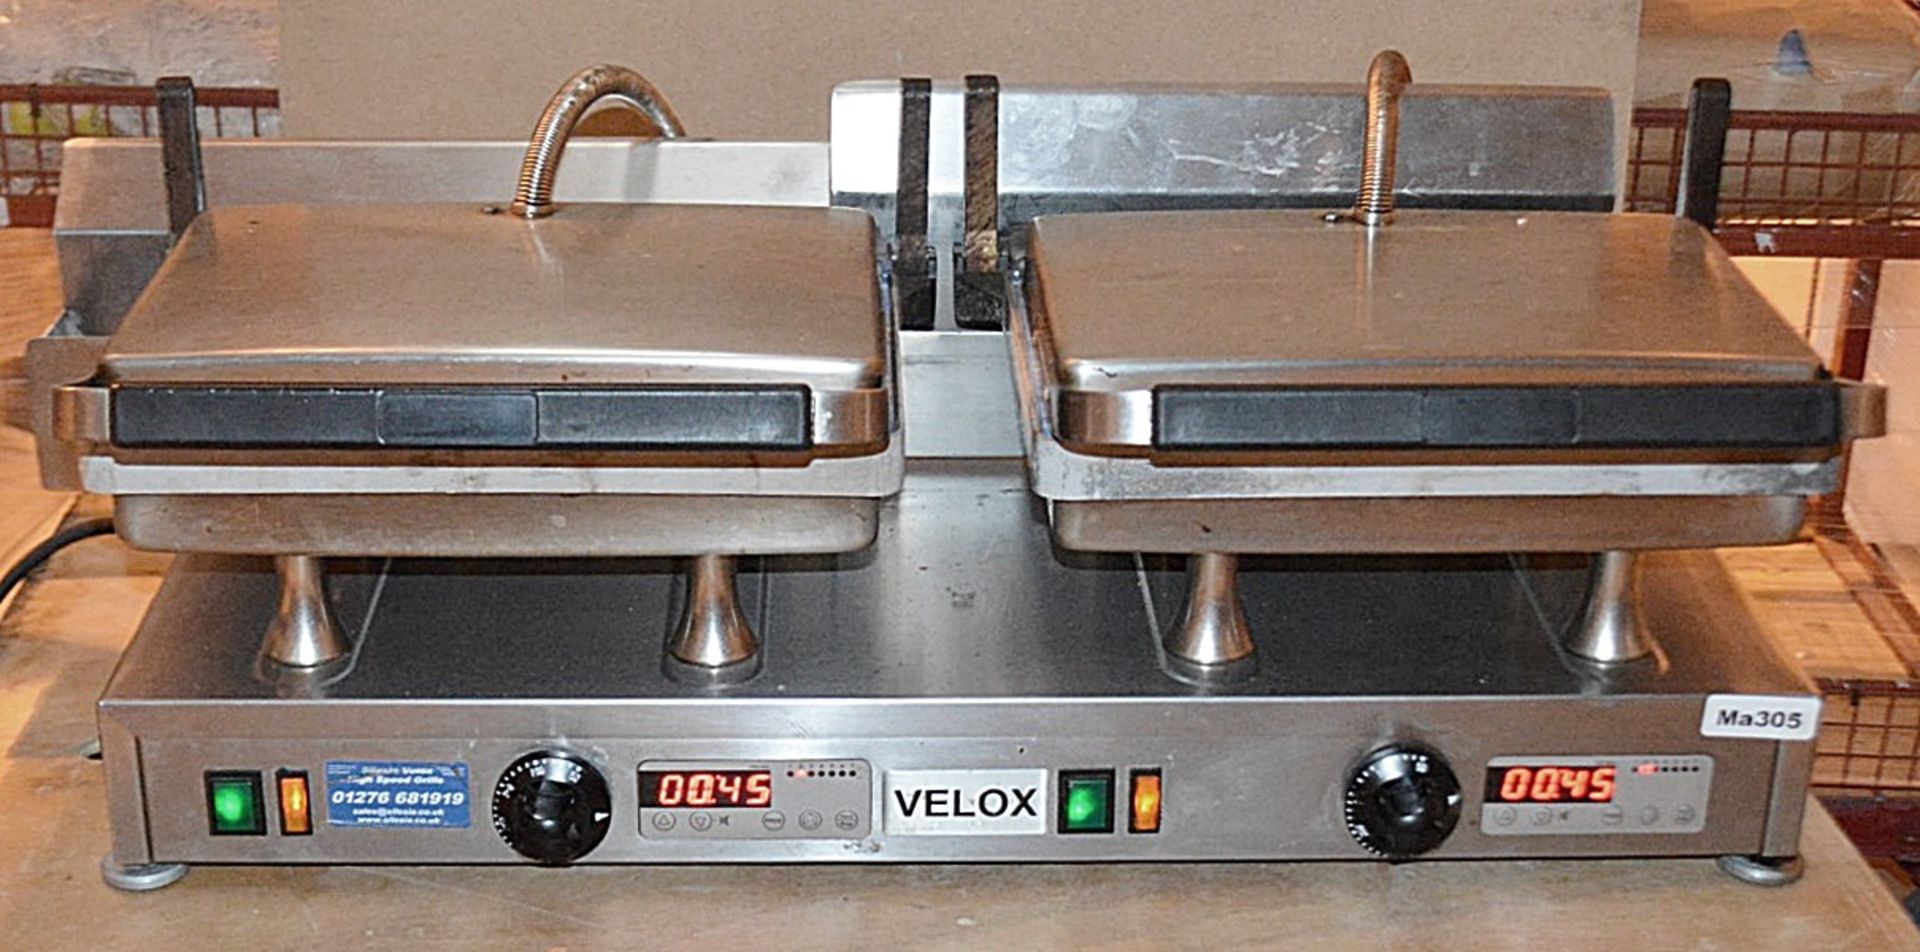 1 x VELOX Double Contact Sandwich / Panini Grill With Smooth Cooking Surfaces - Dimensions: W88 x